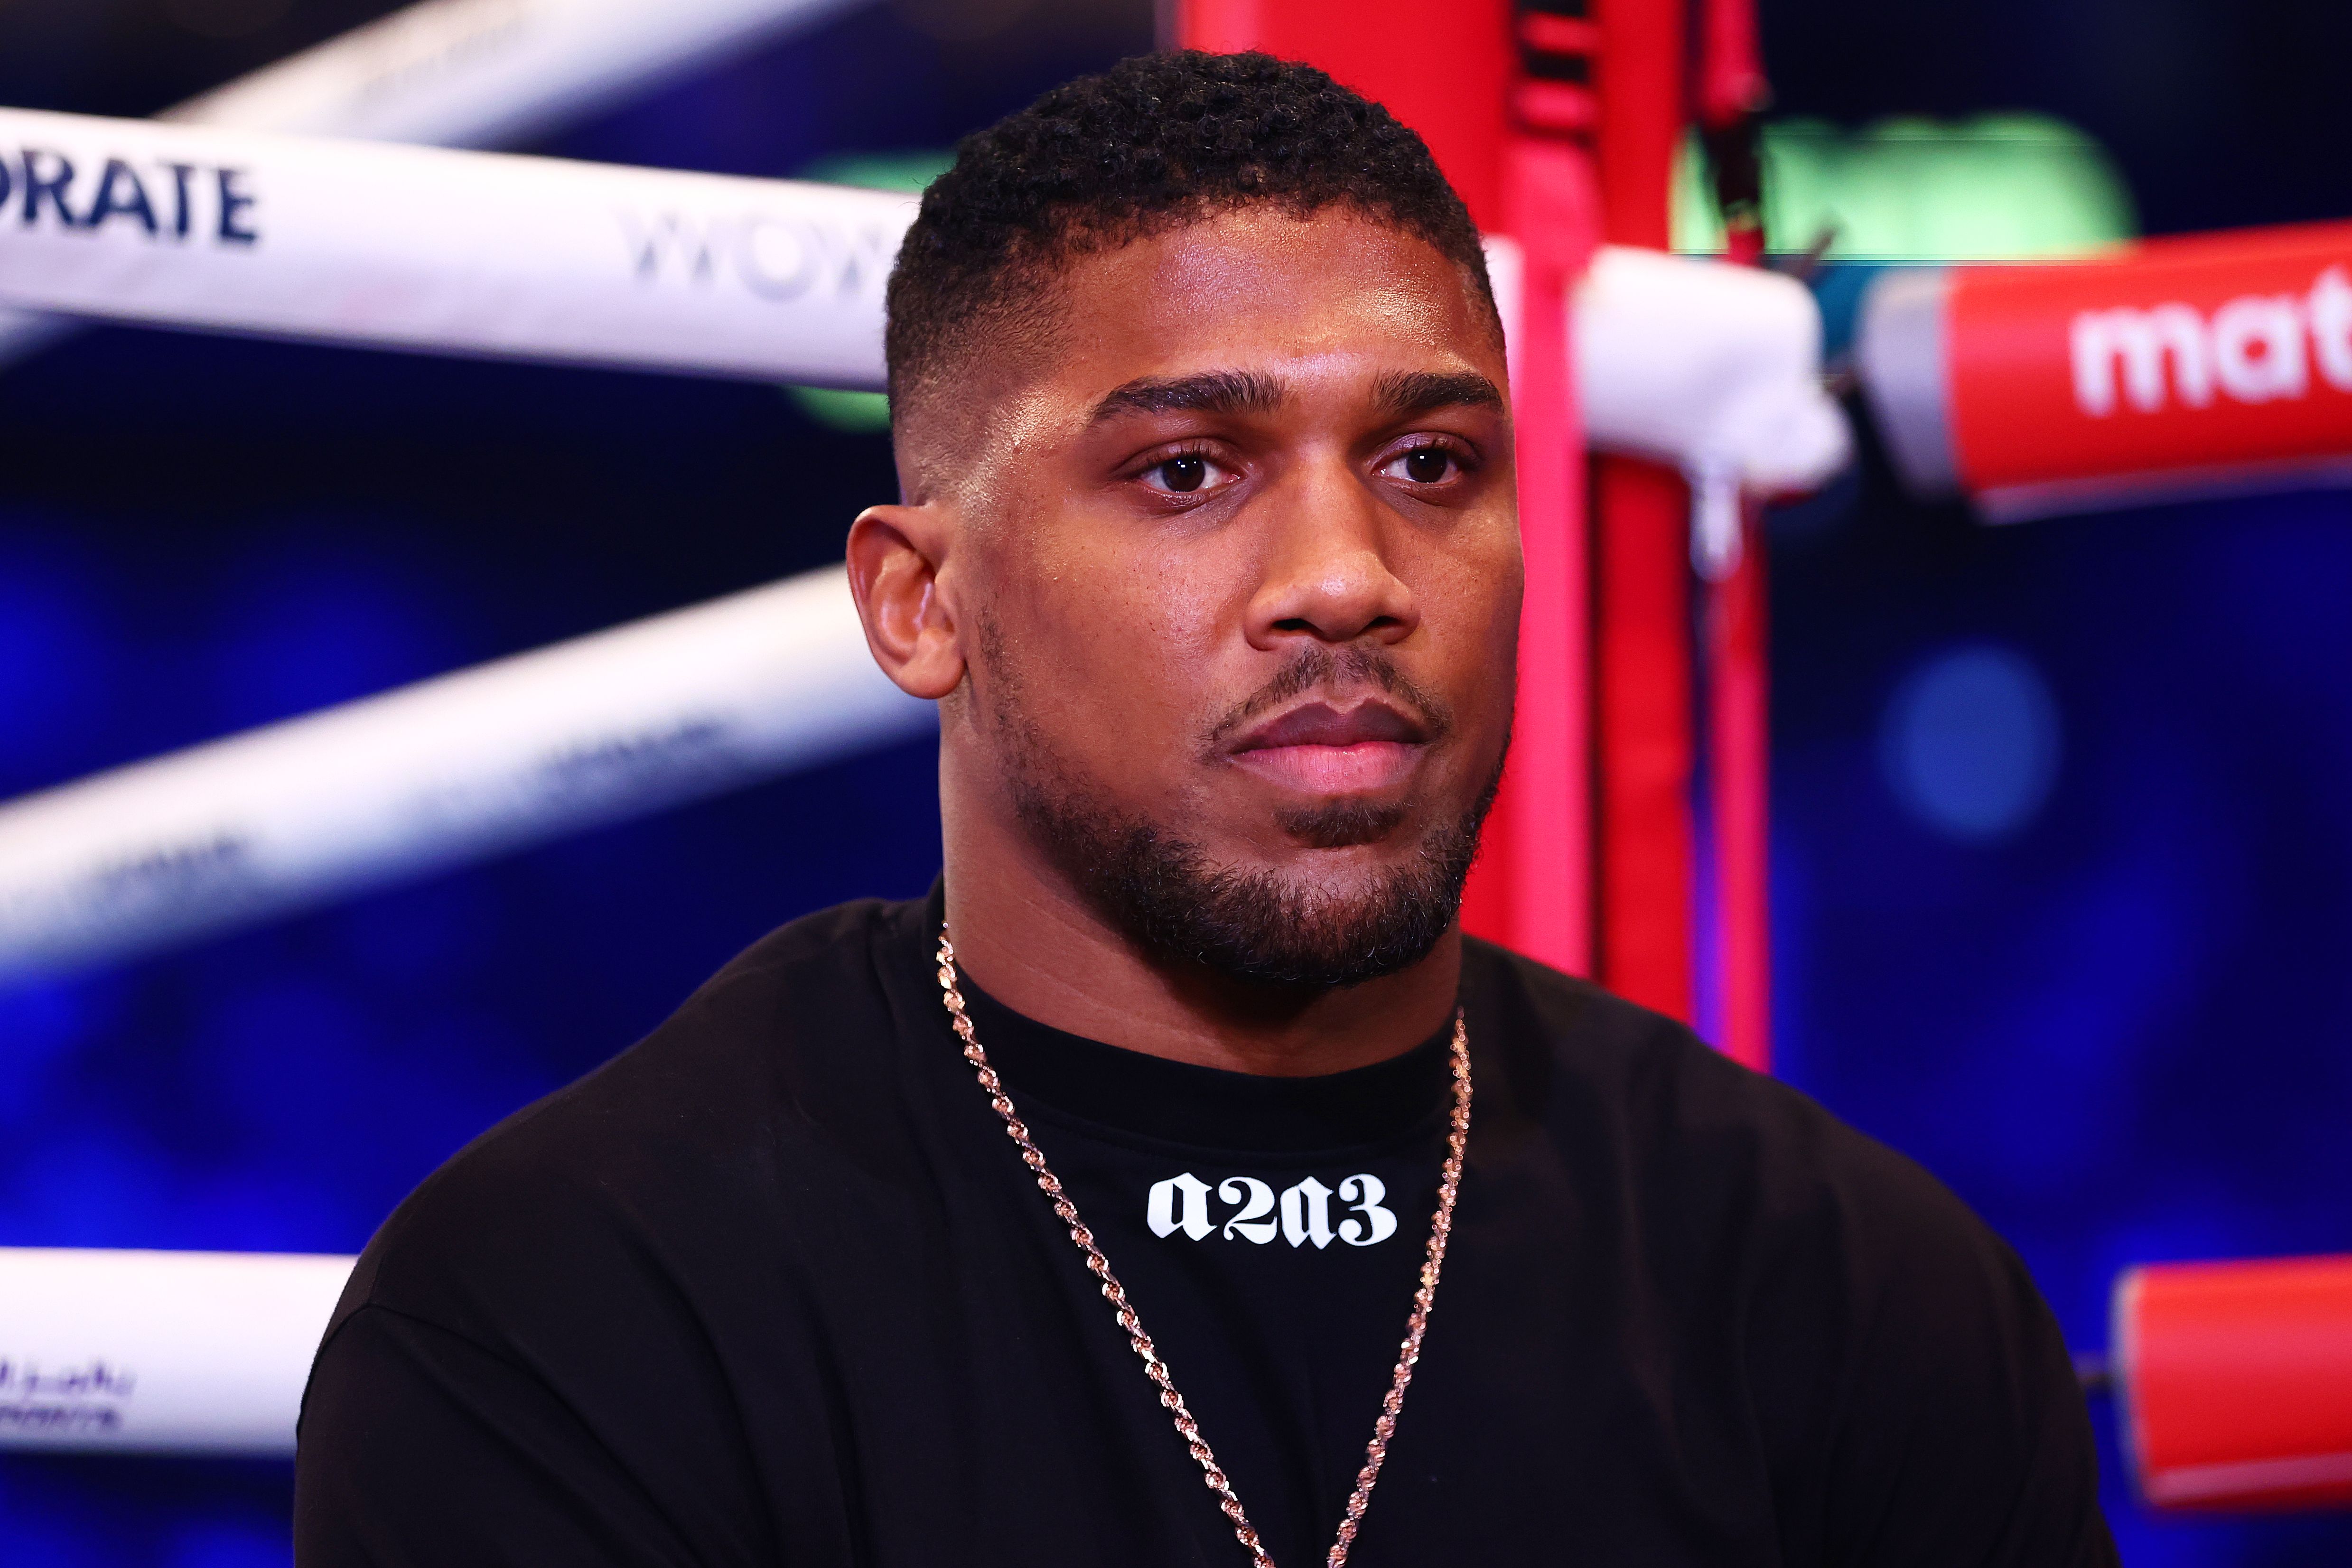 Anthony Joshua is currently looking for his next opponent